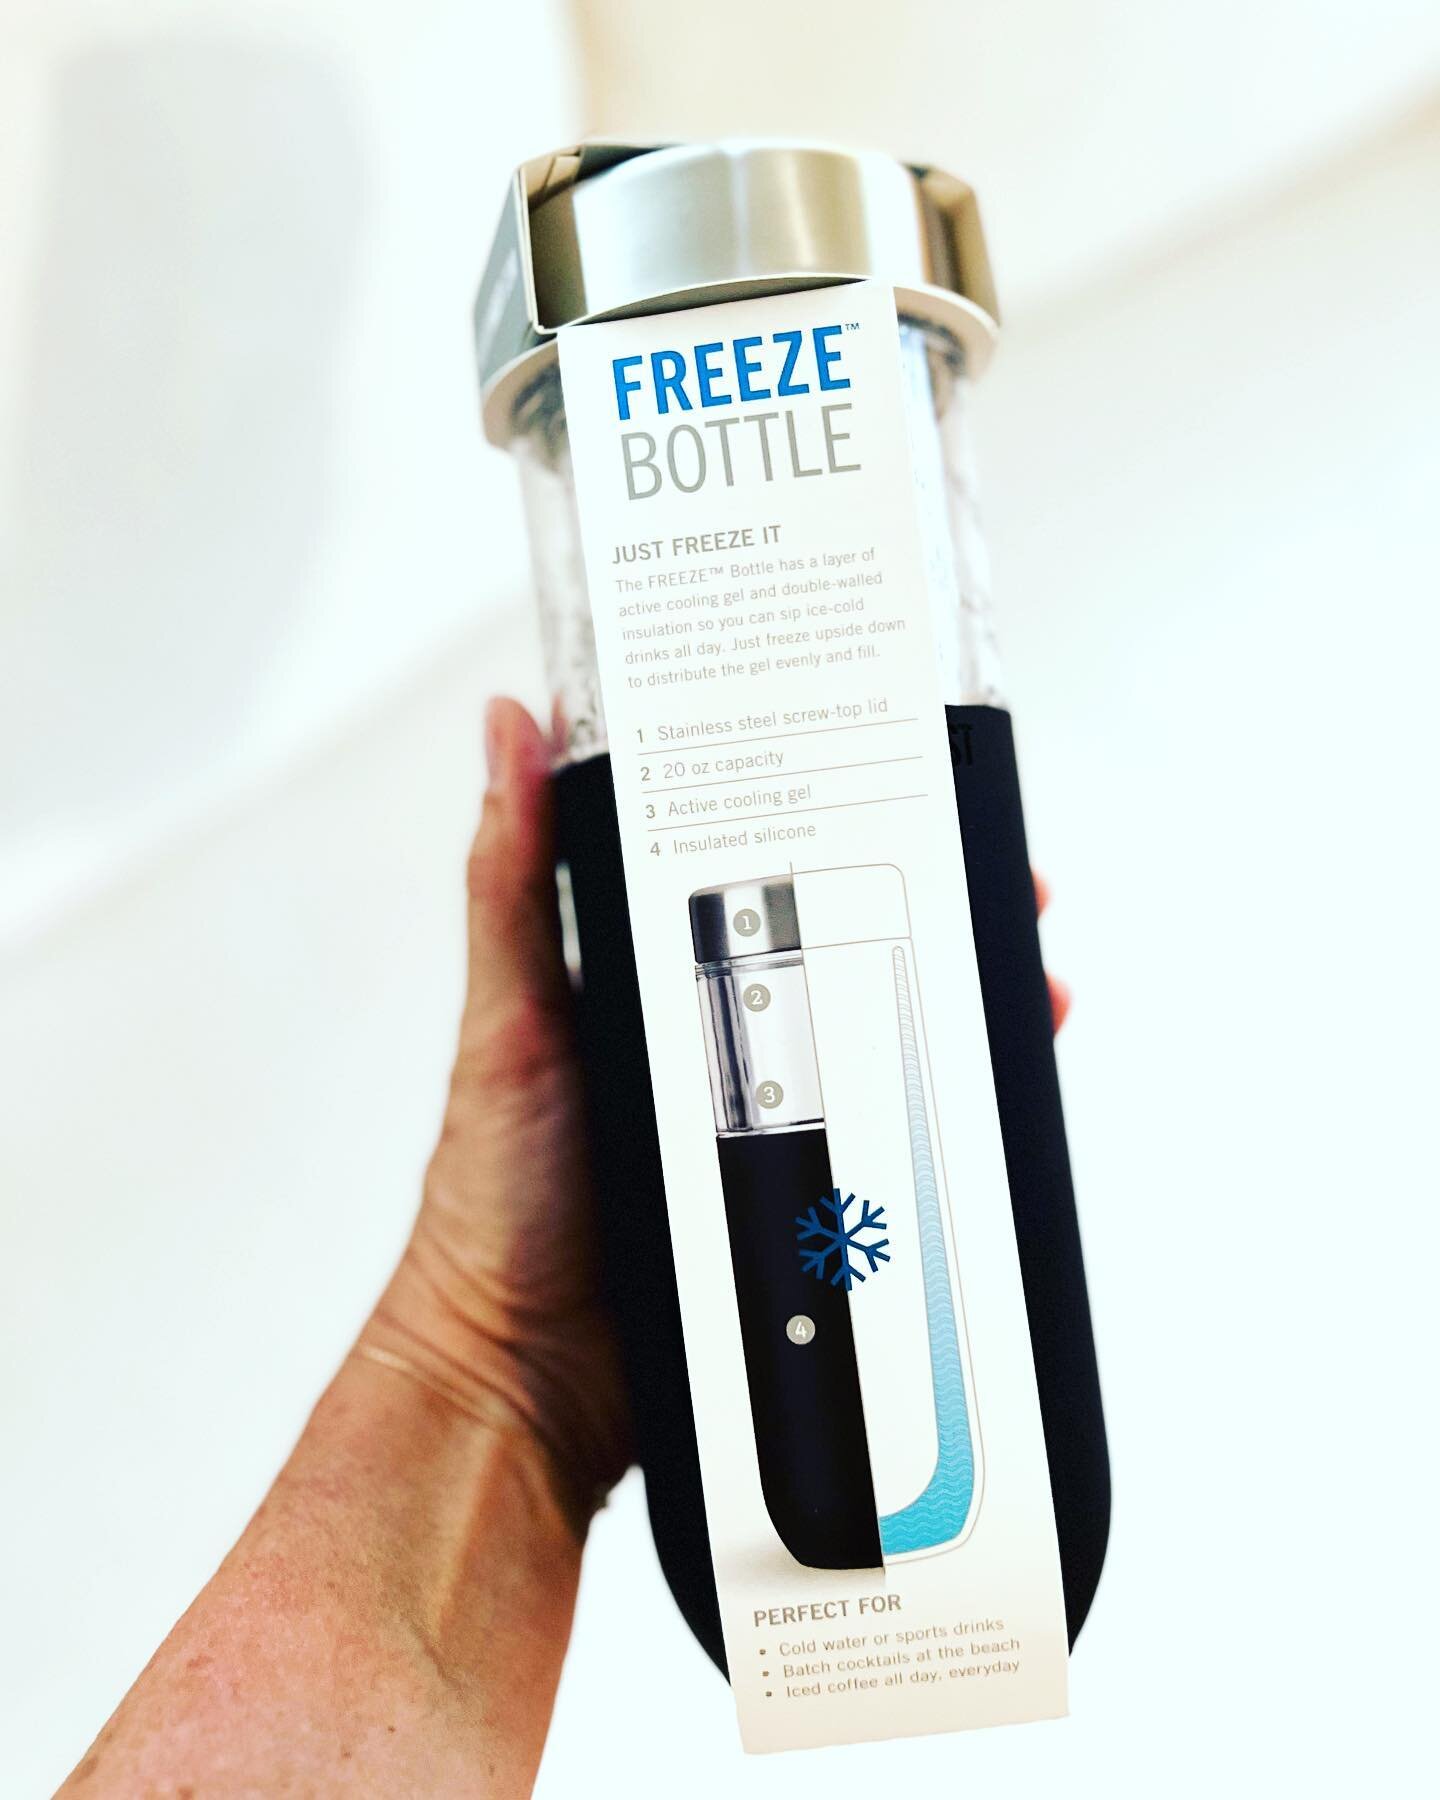 🥶🧊Brrrrrrilliant news!🩵💙 Check out this new piece of #totally #cool drink-ware that EVERYONE is talking about!
.
This double-walled with specially formulated freeze gel bottle is going to be part of your super chilled vibes this summer! The silic